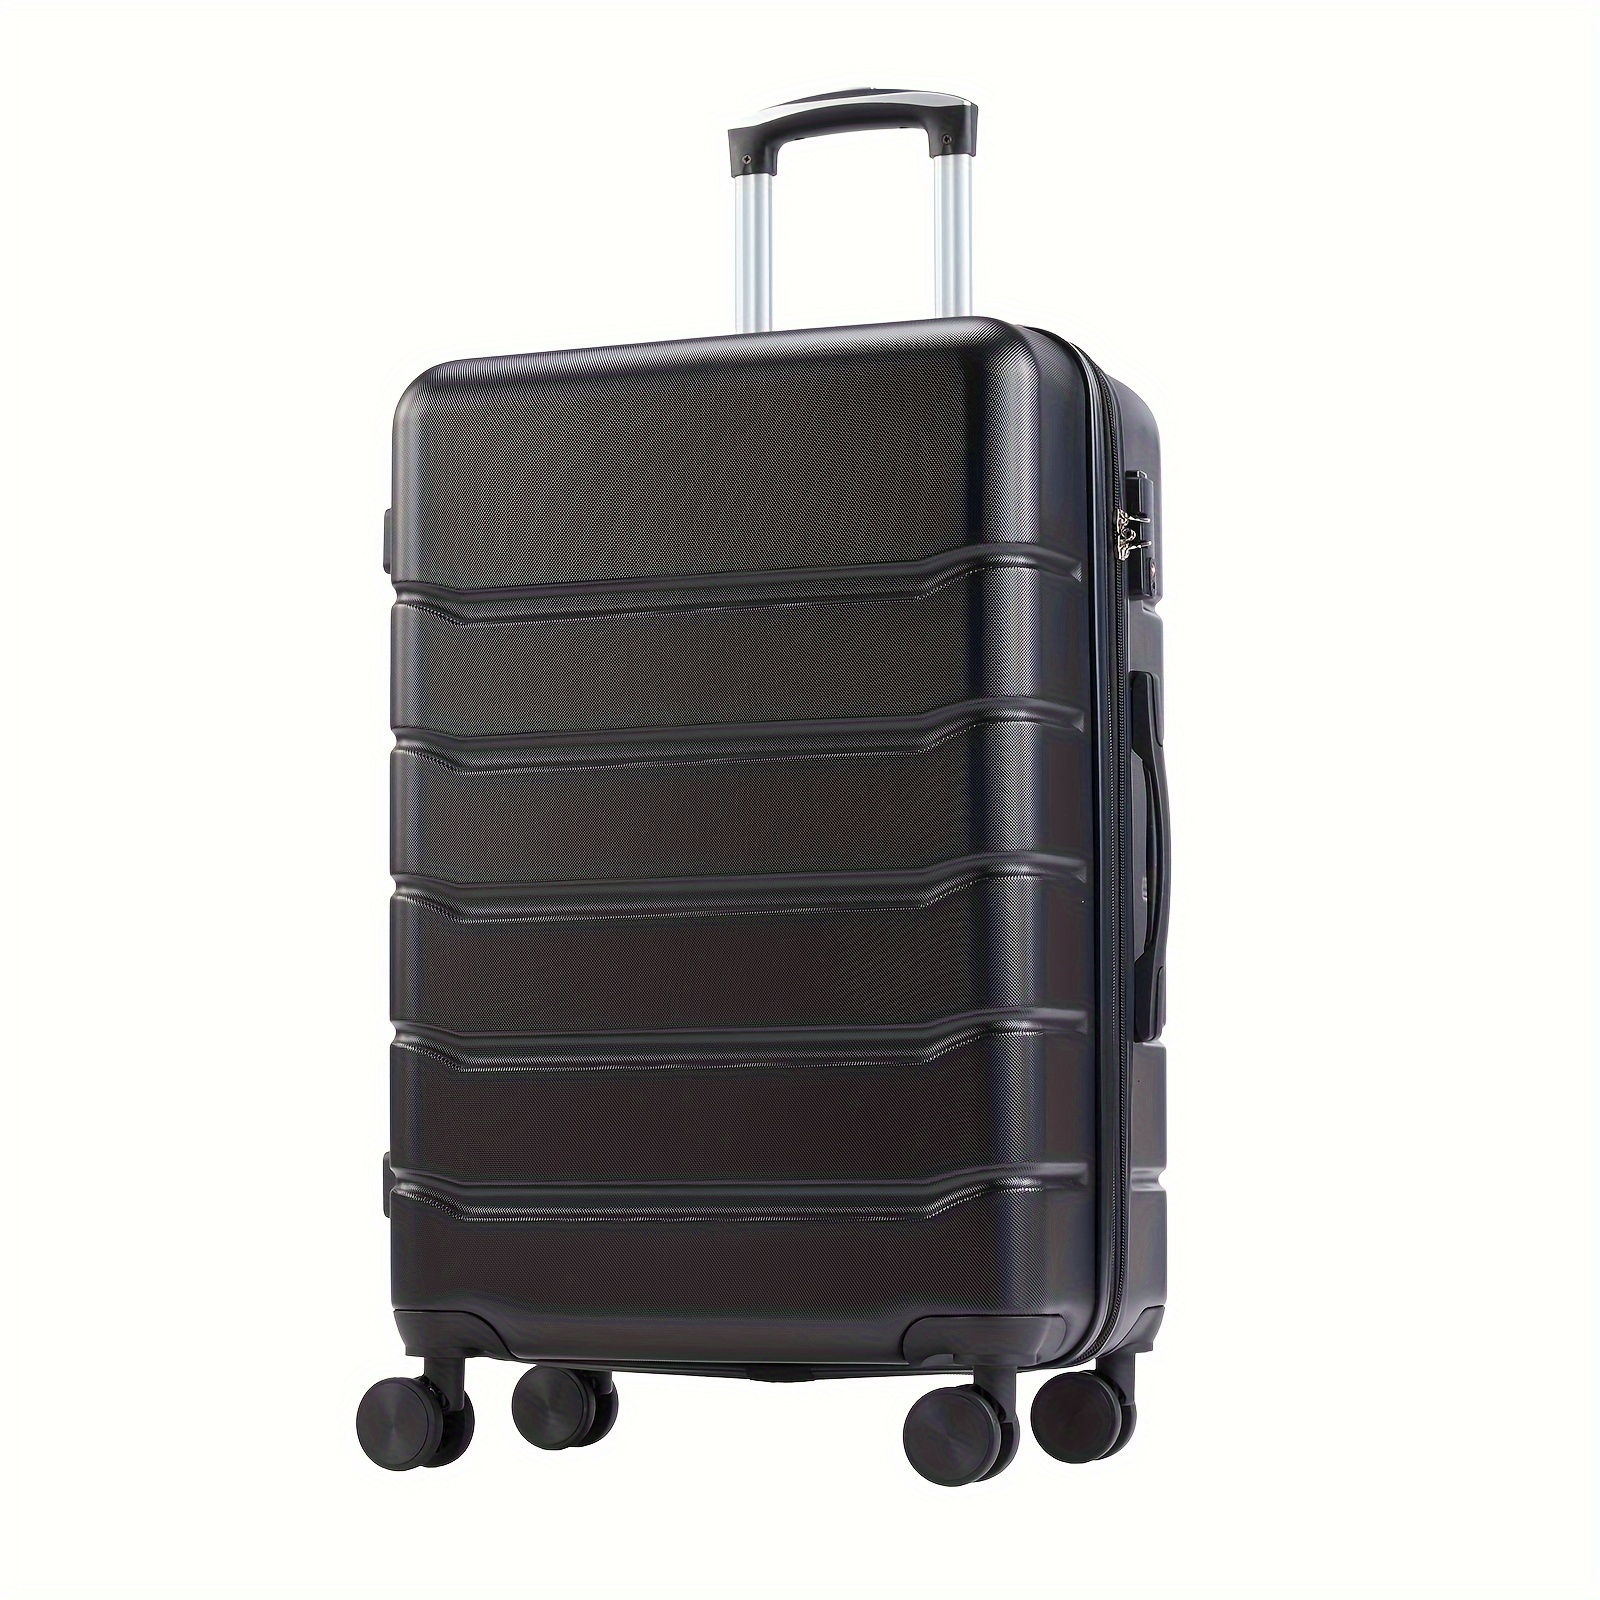 

28-inch Expandable Hardside Luggage, Hard Shell Roller Suitcase With 4 Double Spinner Wheels, Lightweight With Tsa Combination Lock